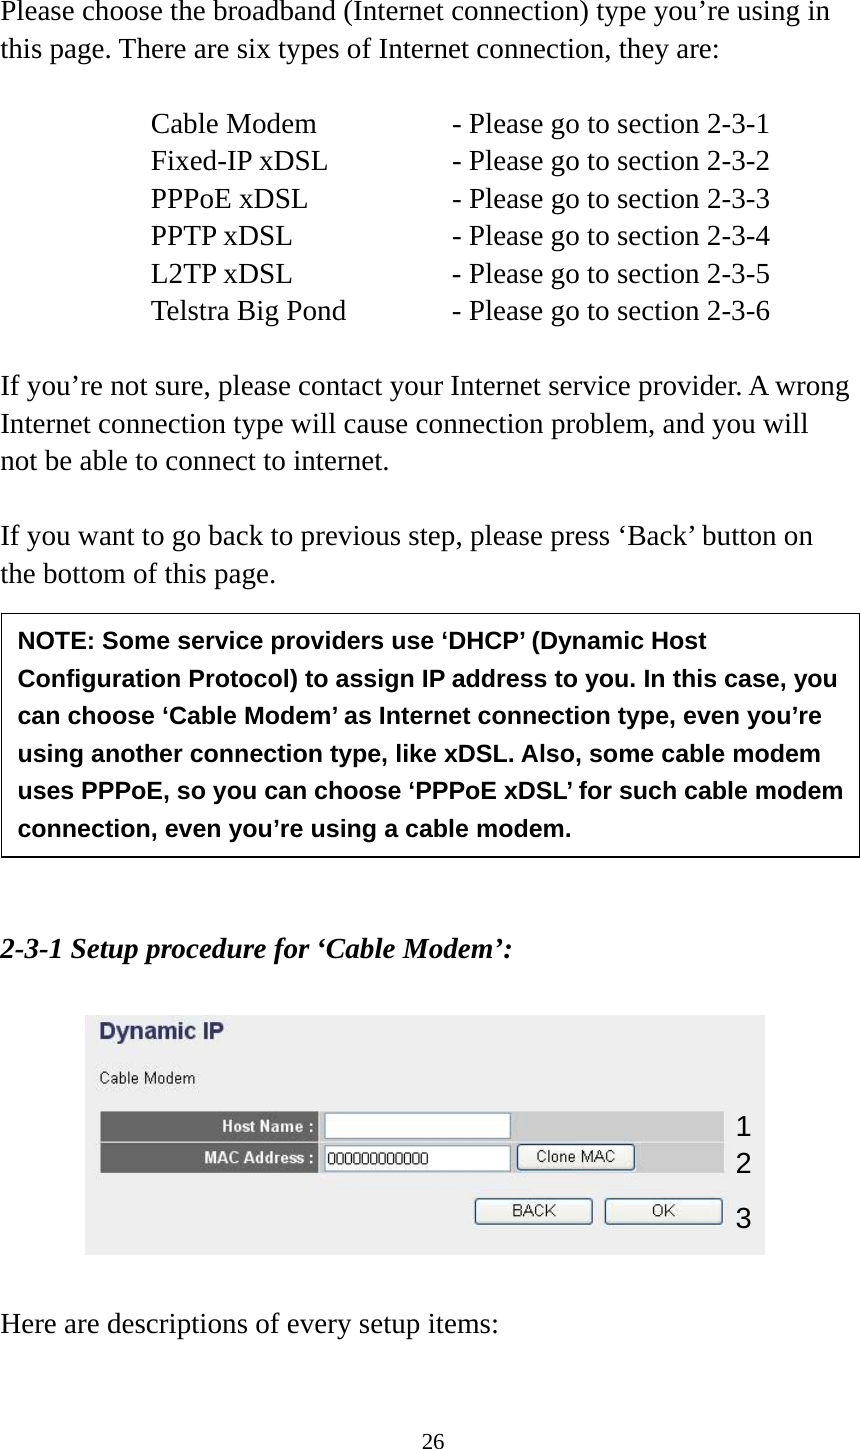 26  Please choose the broadband (Internet connection) type you’re using in this page. There are six types of Internet connection, they are:  Cable Modem      - Please go to section 2-3-1 Fixed-IP xDSL      - Please go to section 2-3-2 PPPoE xDSL      - Please go to section 2-3-3 PPTP xDSL       - Please go to section 2-3-4 L2TP xDSL       - Please go to section 2-3-5 Telstra Big Pond     - Please go to section 2-3-6  If you’re not sure, please contact your Internet service provider. A wrong Internet connection type will cause connection problem, and you will not be able to connect to internet.  If you want to go back to previous step, please press ‘Back’ button on the bottom of this page.          2-3-1 Setup procedure for ‘Cable Modem’:    Here are descriptions of every setup items:  NOTE: Some service providers use ‘DHCP’ (Dynamic Host Configuration Protocol) to assign IP address to you. In this case, you can choose ‘Cable Modem’ as Internet connection type, even you’re using another connection type, like xDSL. Also, some cable modem uses PPPoE, so you can choose ‘PPPoE xDSL’ for such cable modem connection, even you’re using a cable modem. 1 2 3 